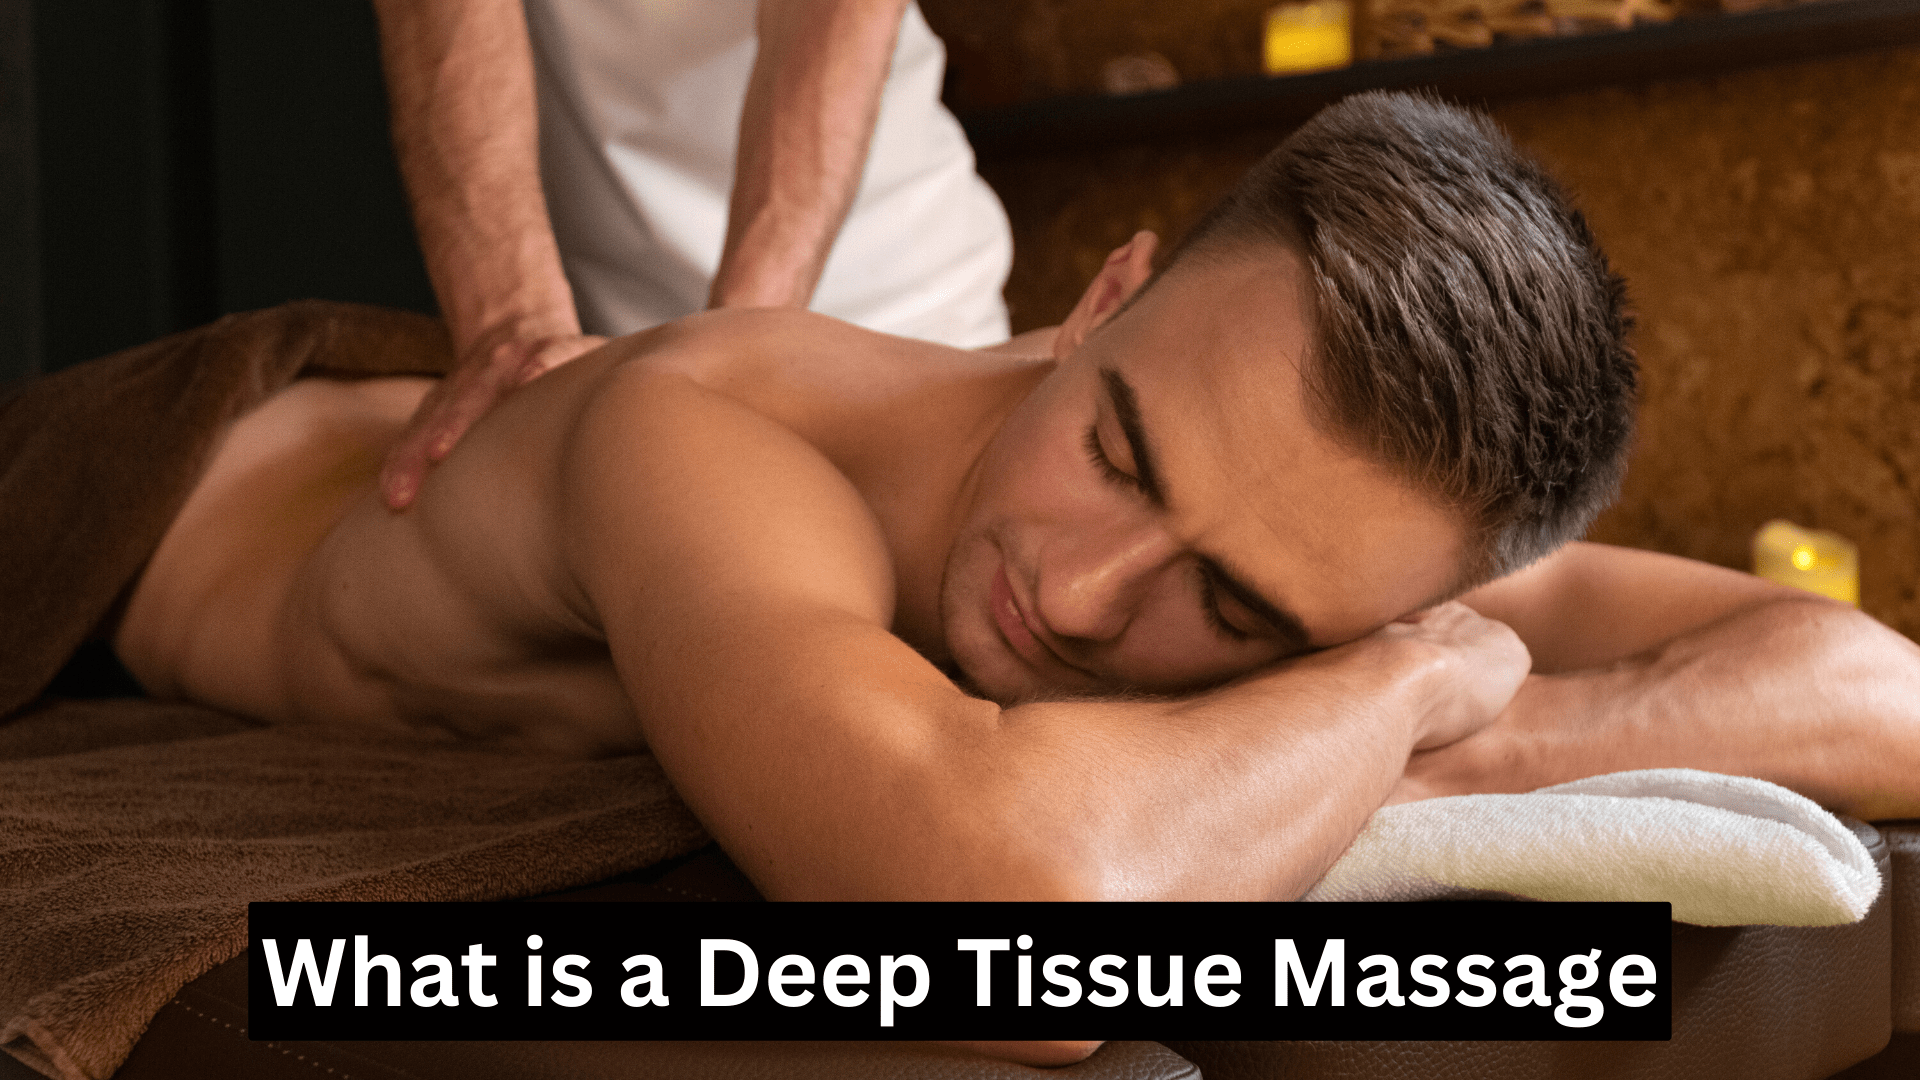 What is a Deep Tissue Massage